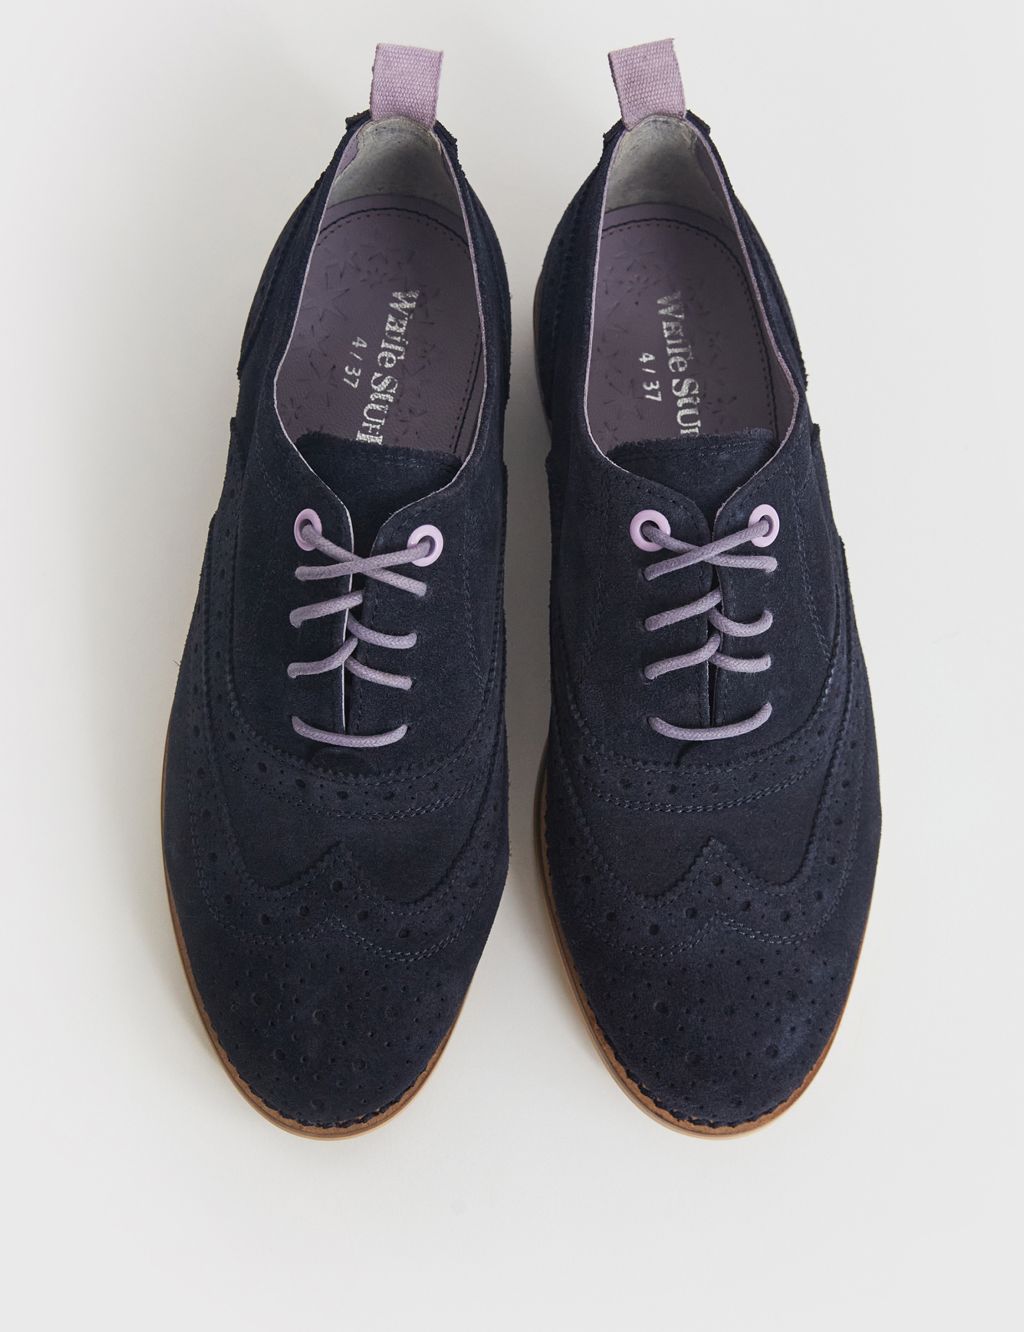 Suede Lace Up Flat Brogues image 4